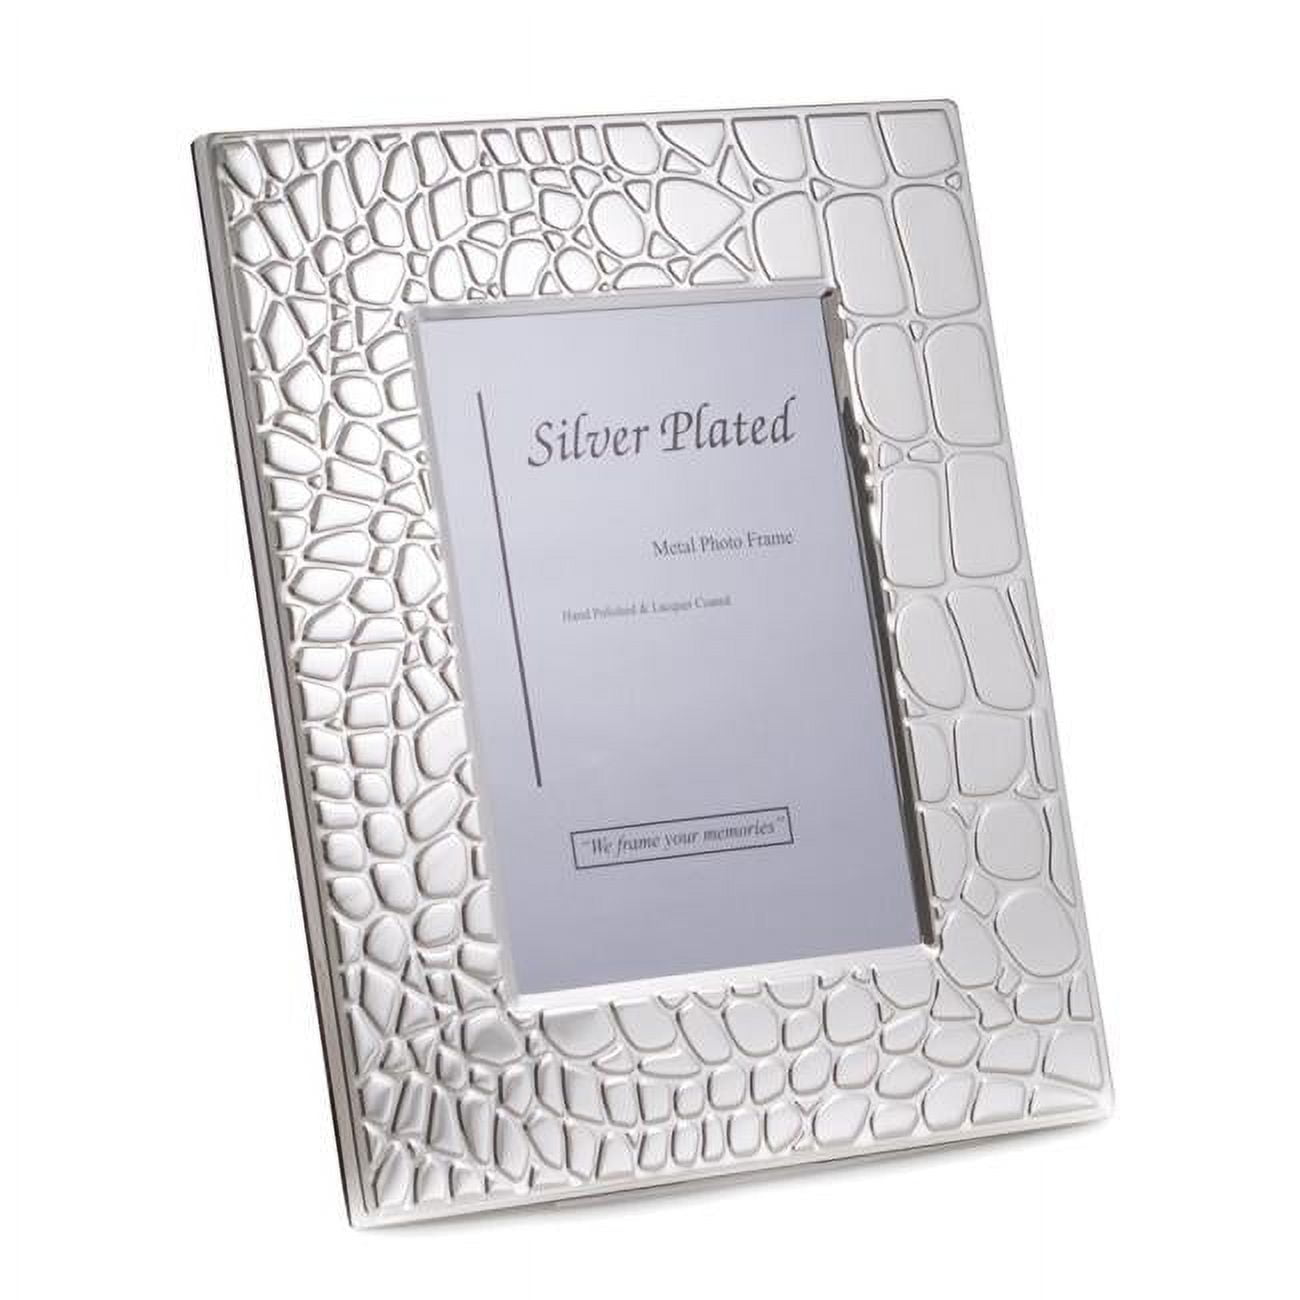 Picture of Bey-Berk International SF110-11 5 x 7 in. Silver Plated with Croco Design Picture Frame with Easel Back 